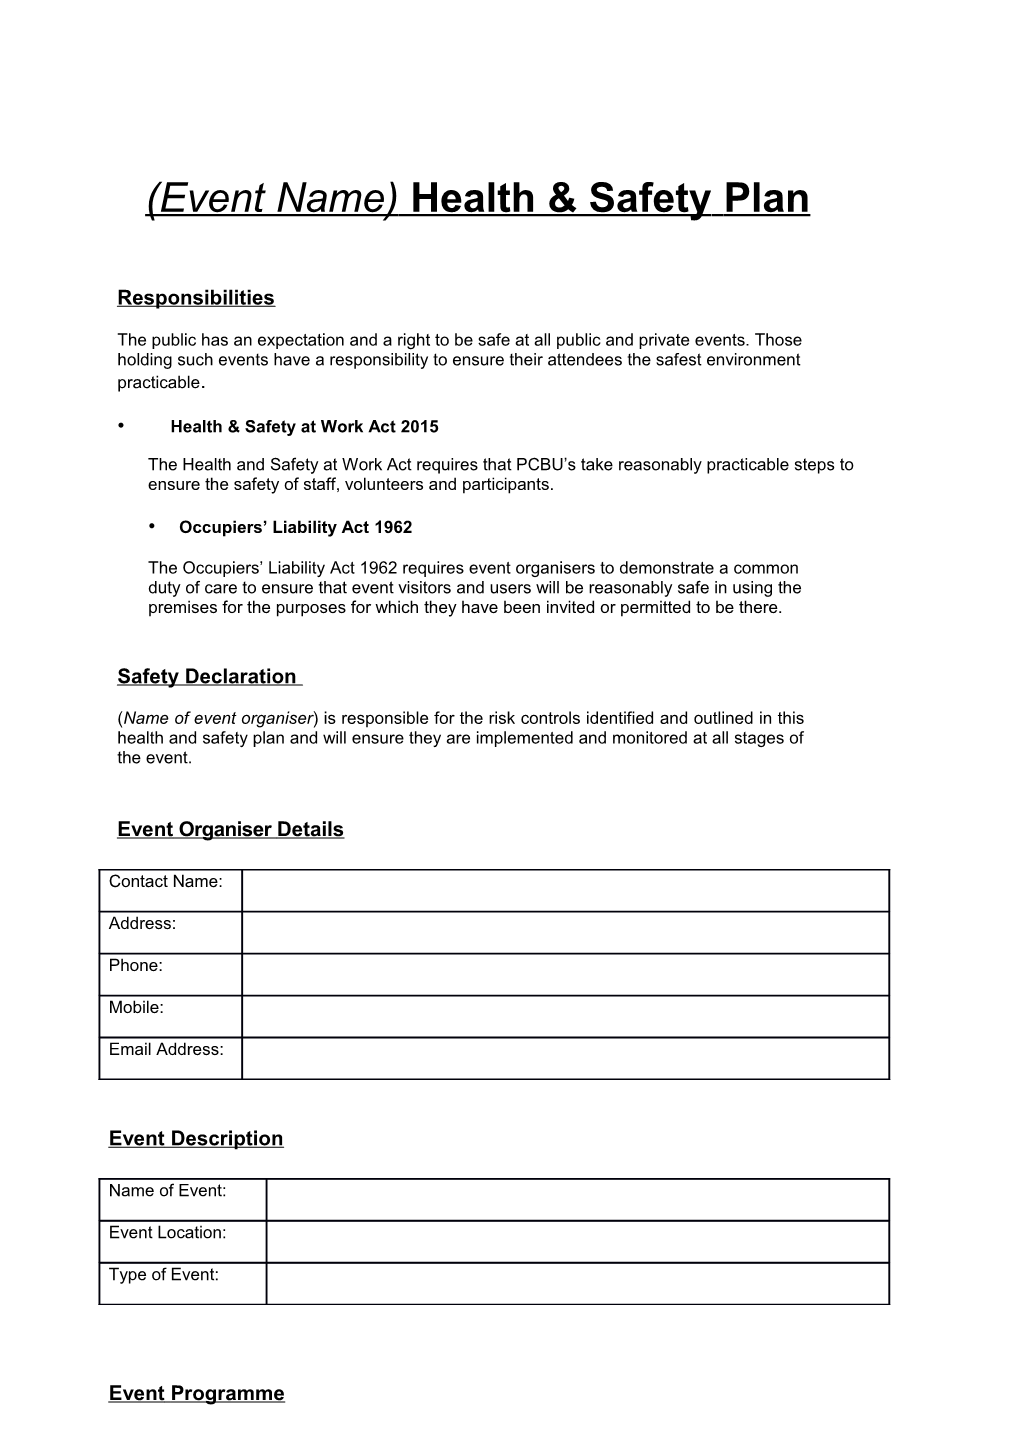 Heath and Safety Planning Template